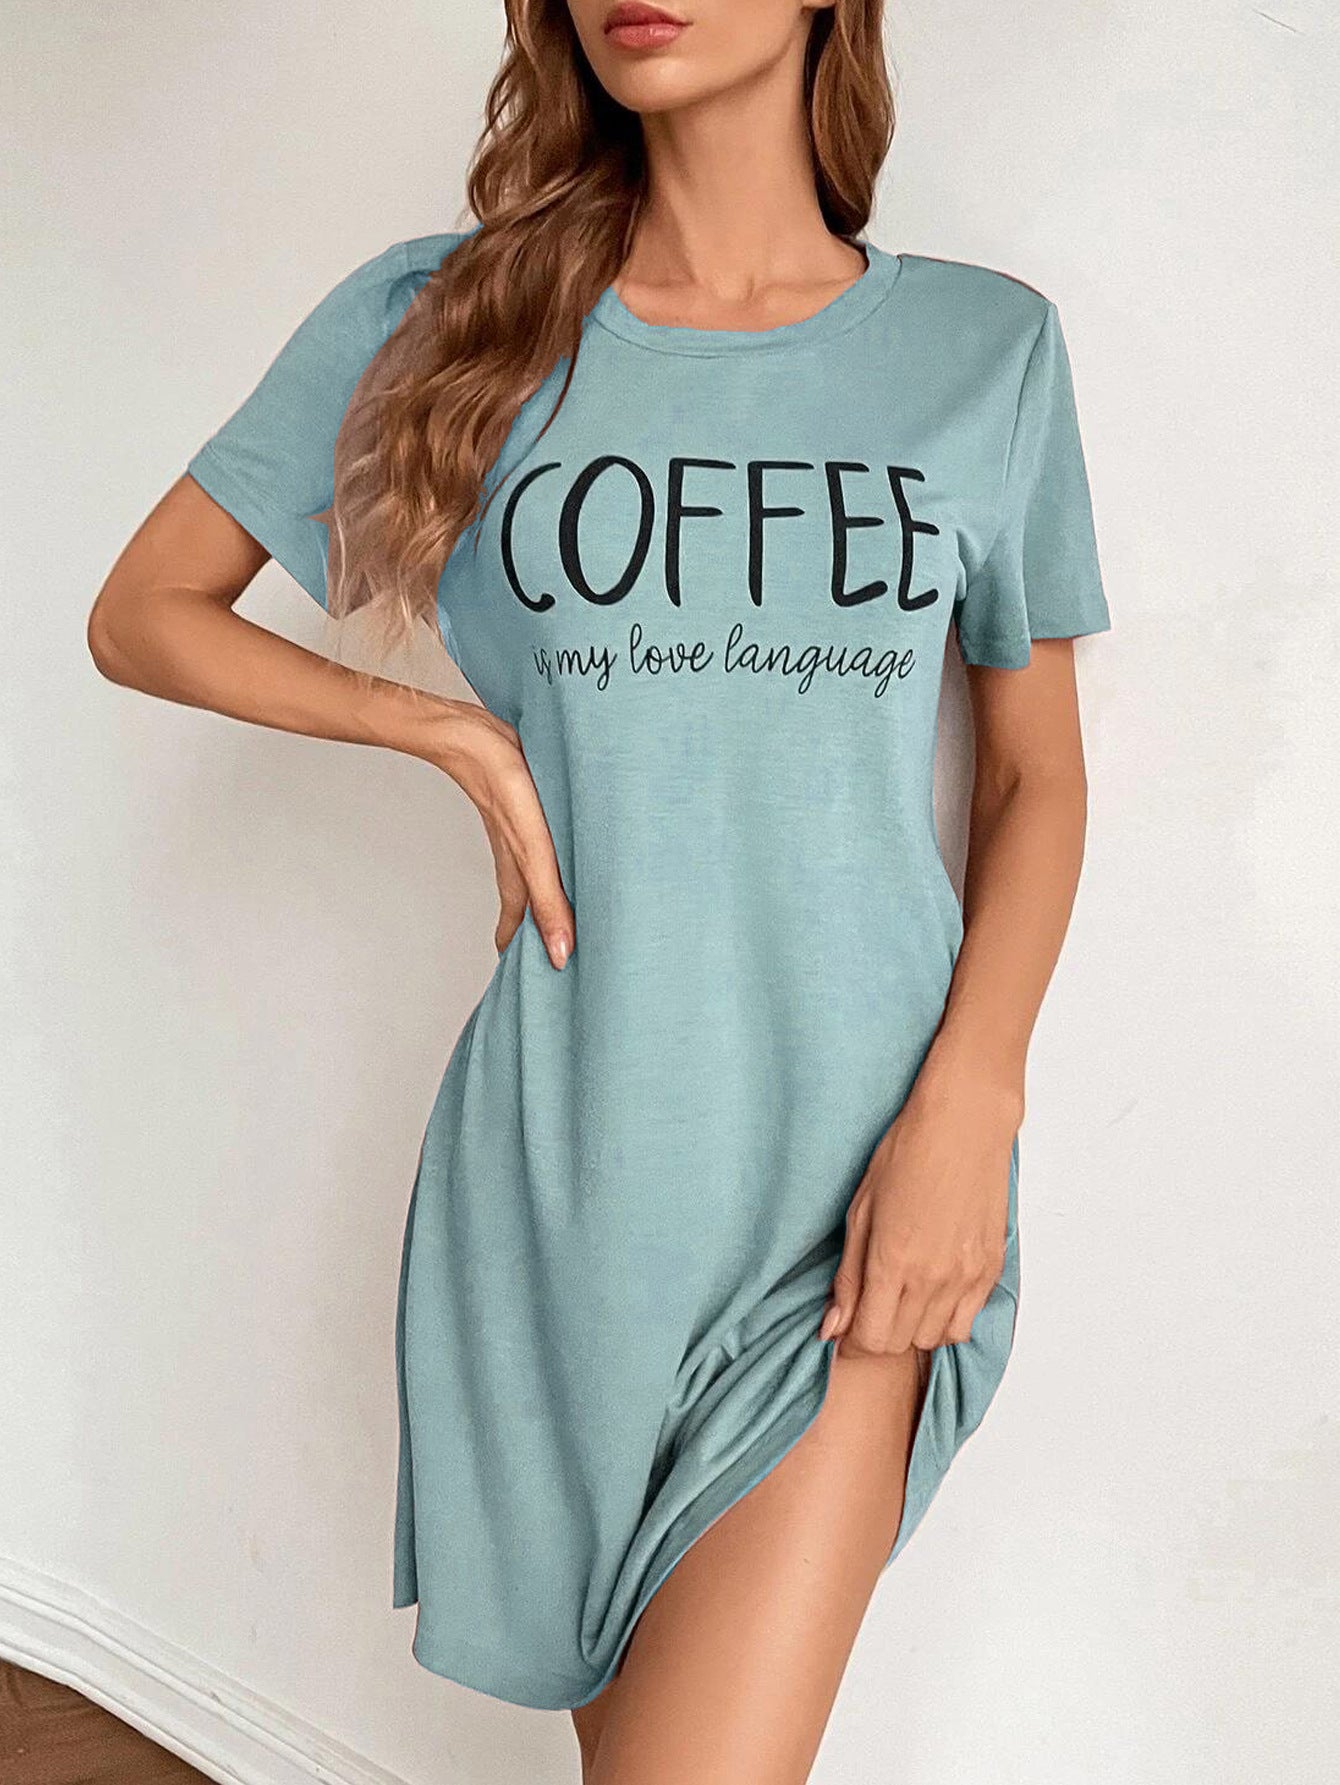 European And American New Fashion Dress For Women